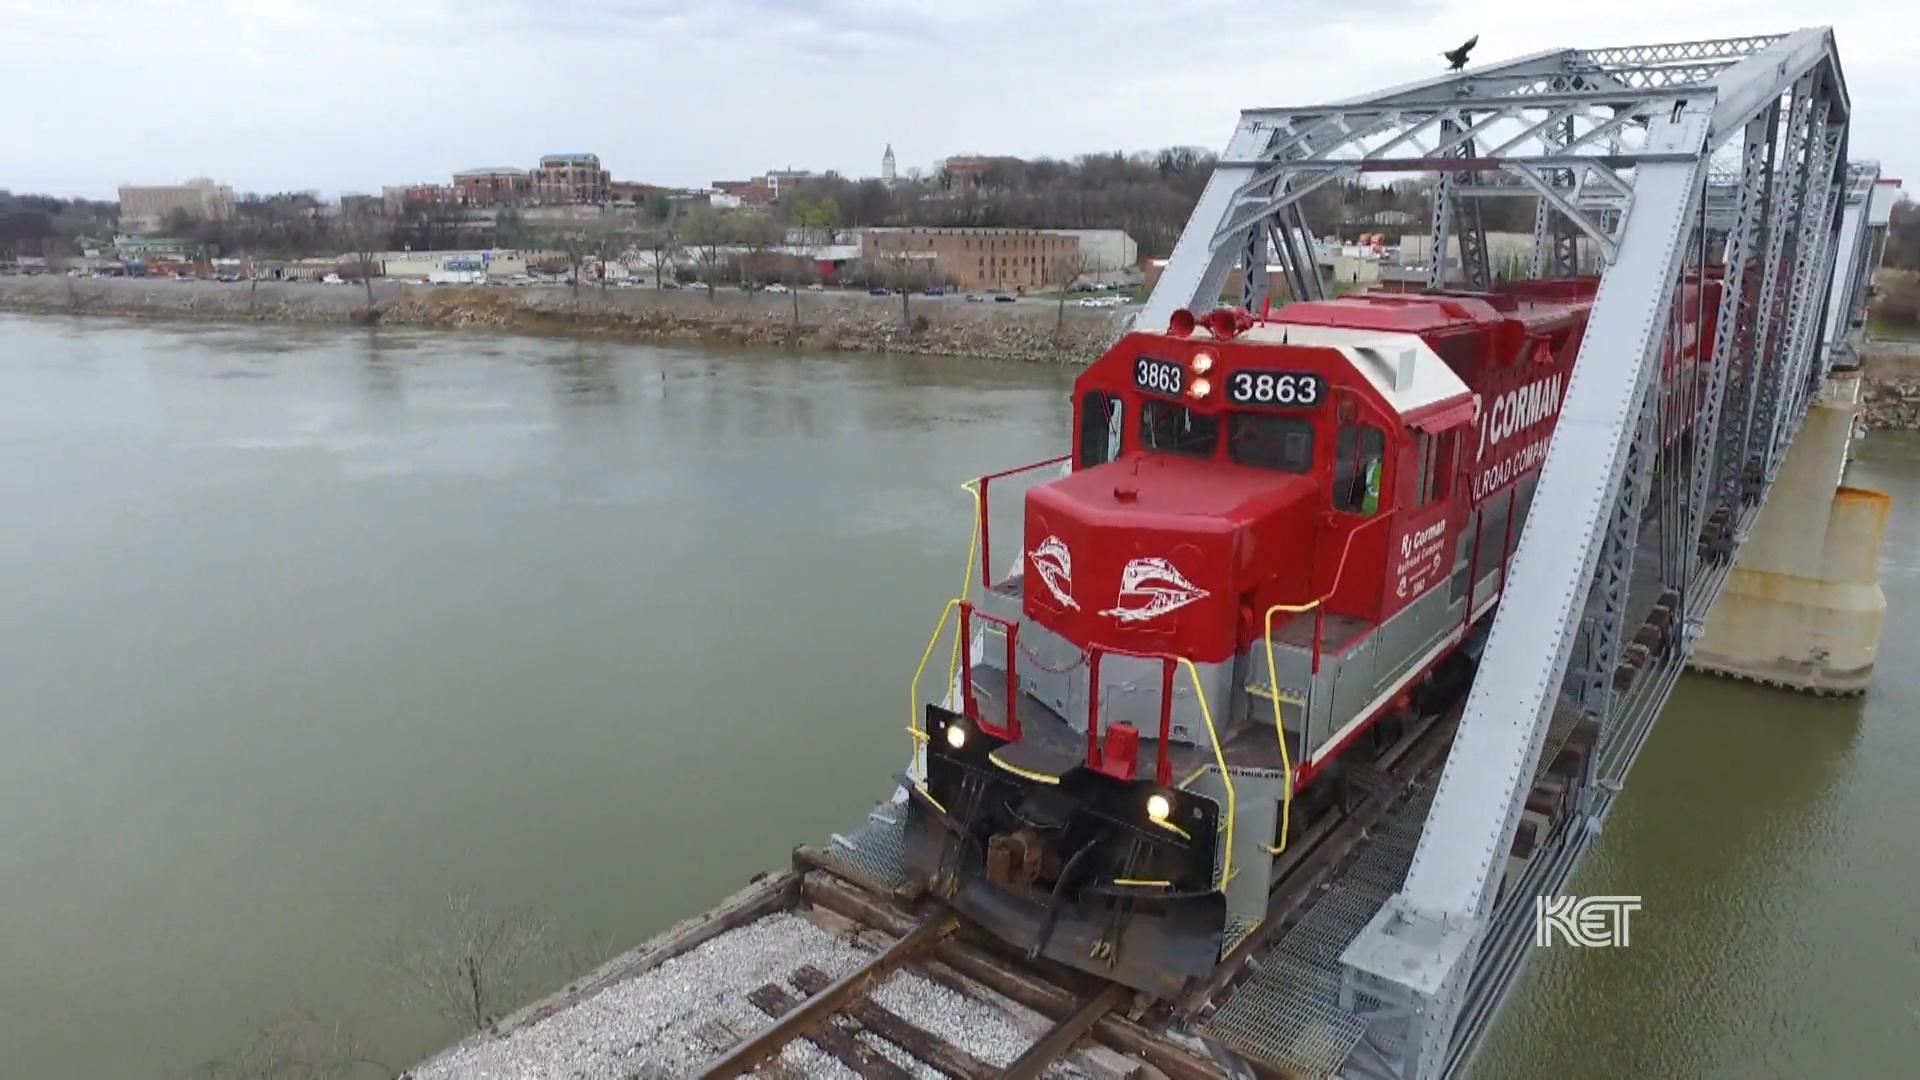 A red train riding on a steel bridge over a river